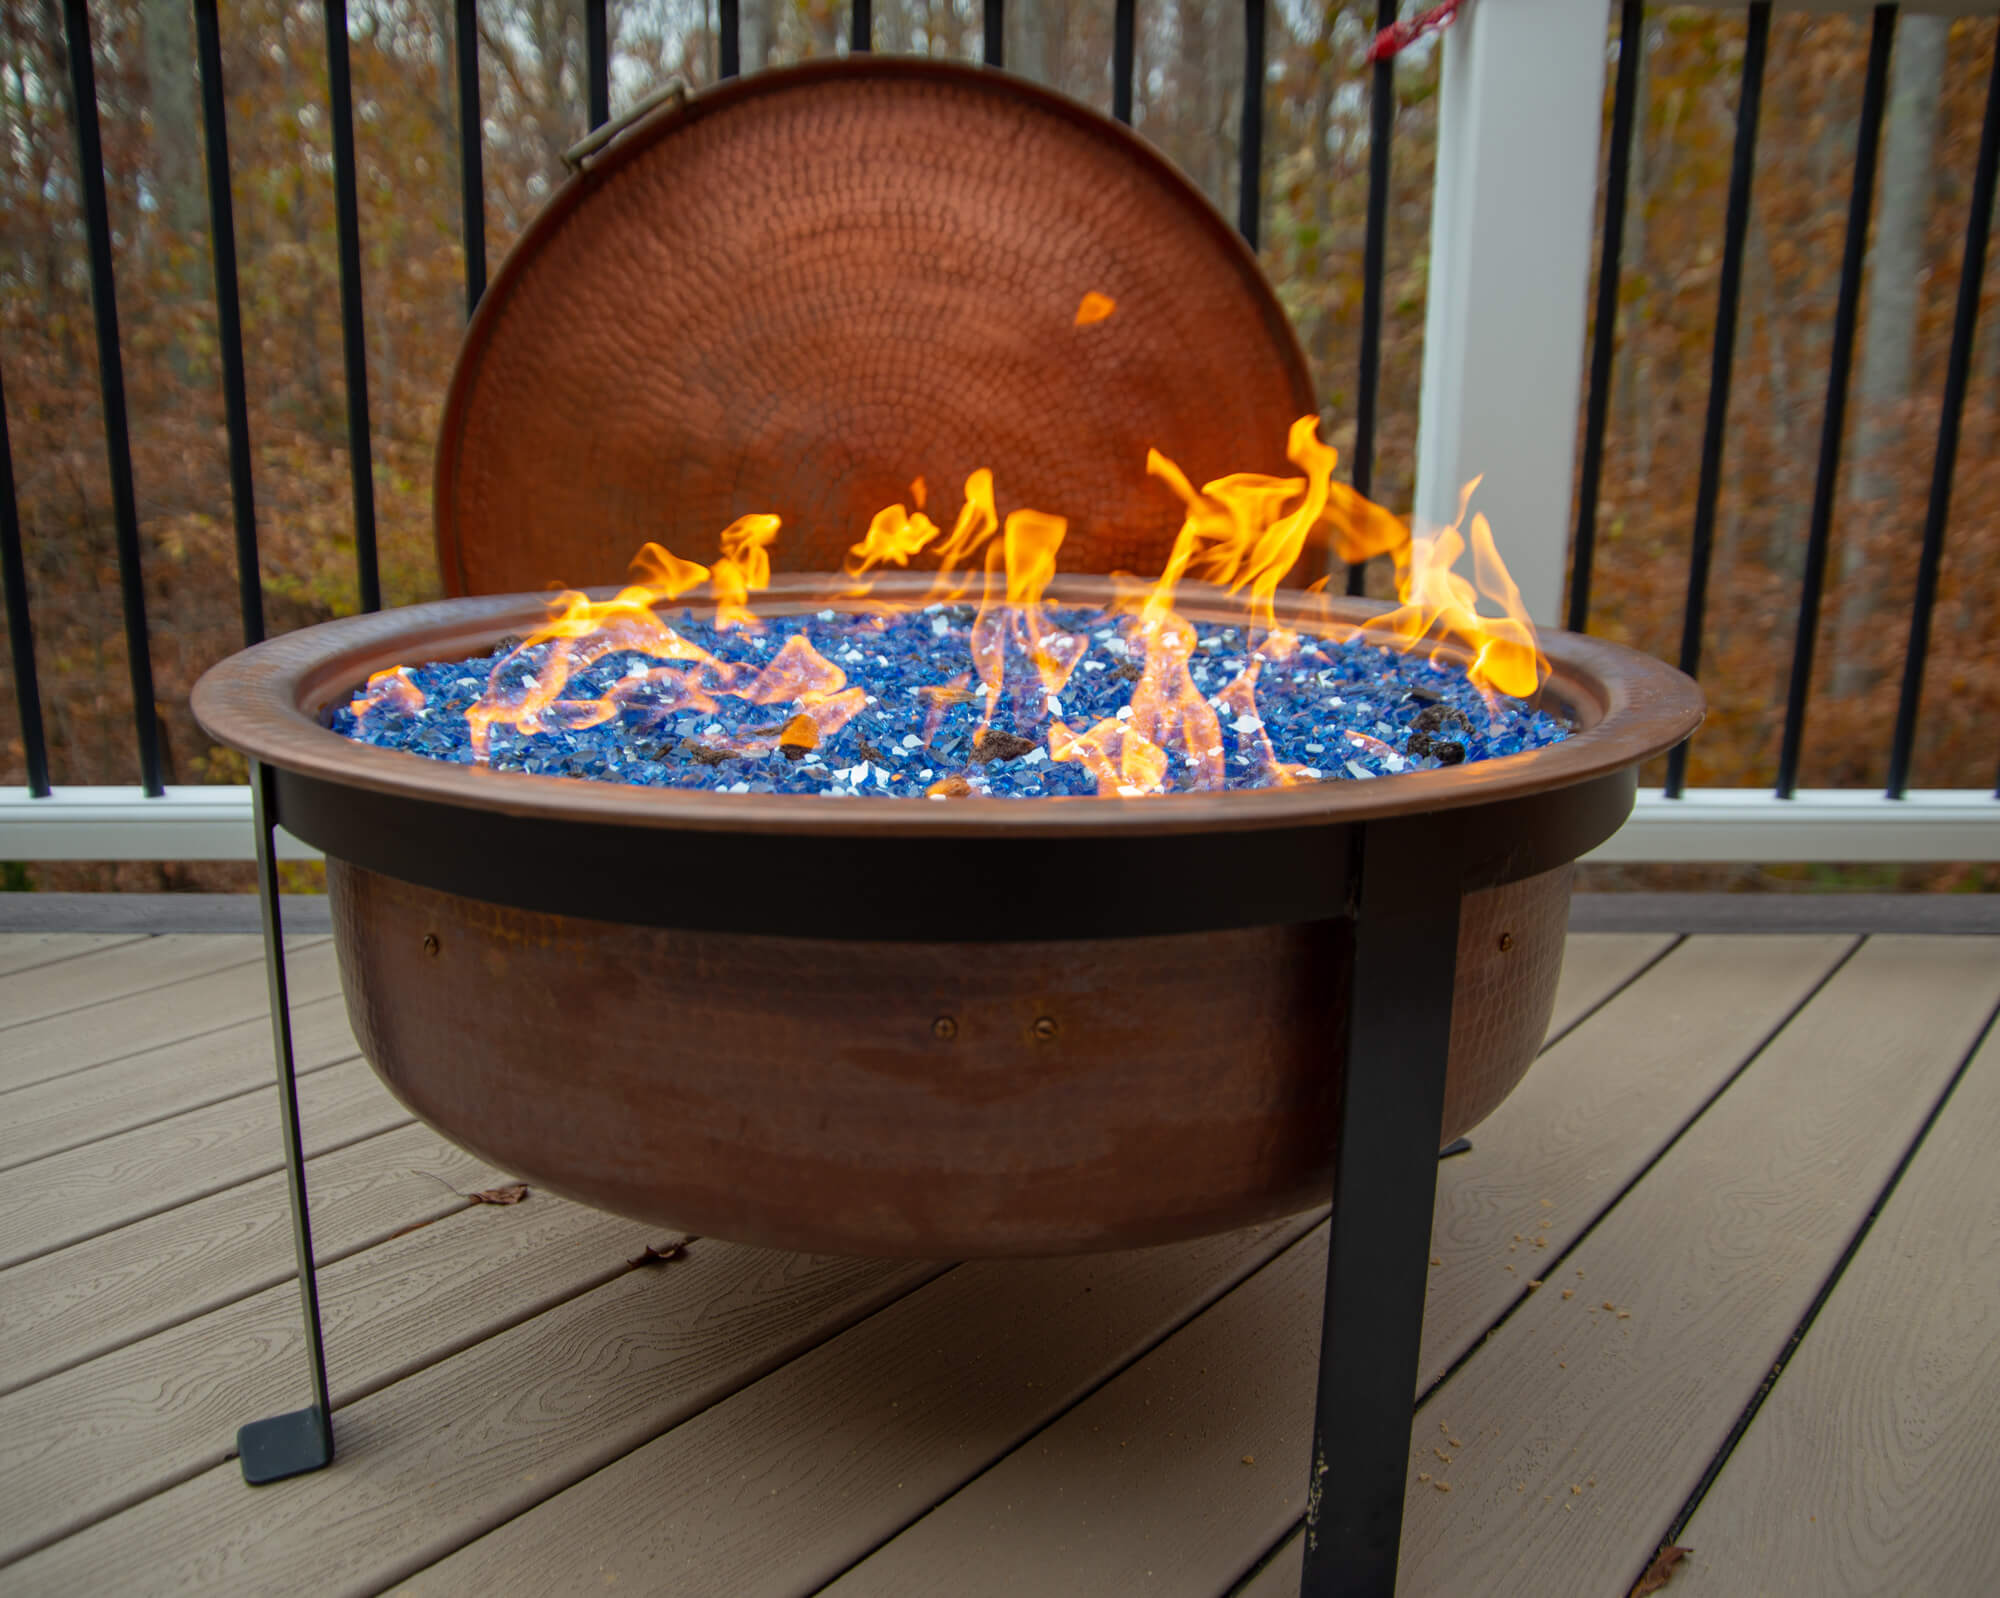 6 Ways To Put A Fire Pit On Wooden Deck, Is A Propane Fire Pit Safe On Deck